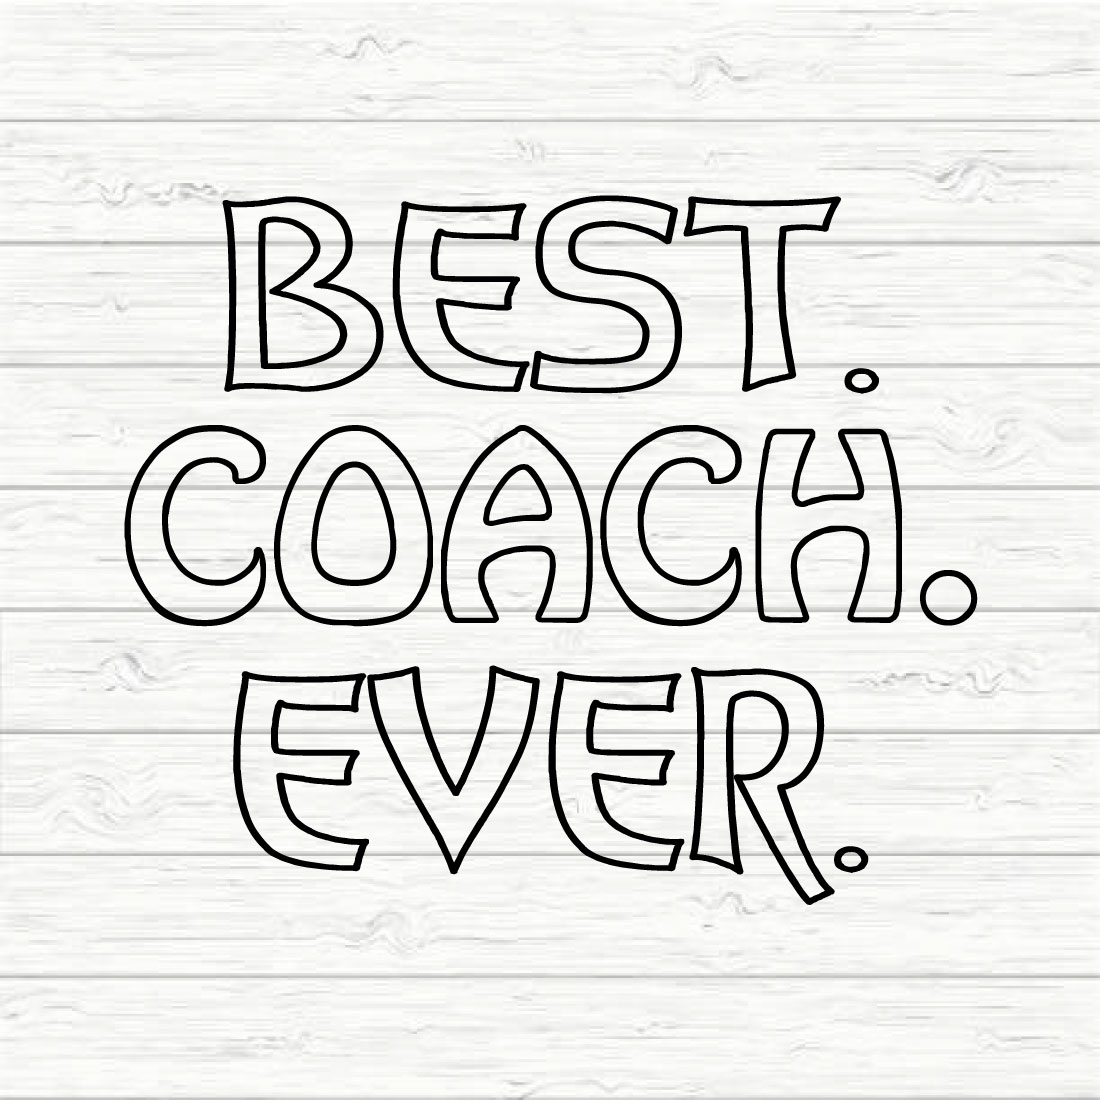 Best coach ever preview image.